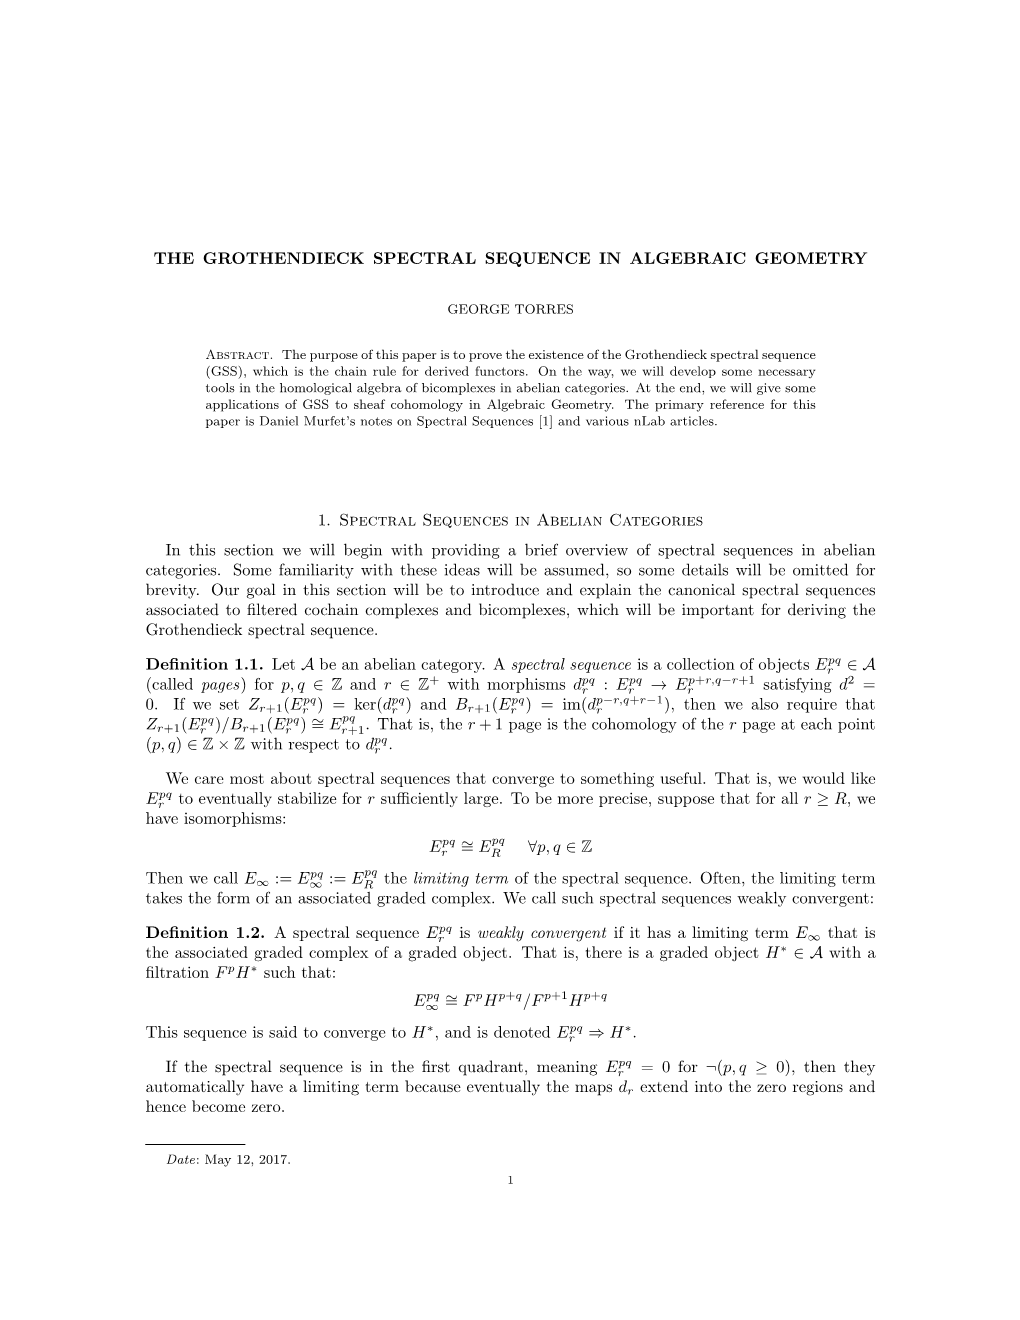 The Grothendieck Spectral Sequence in Algebraic Geometry